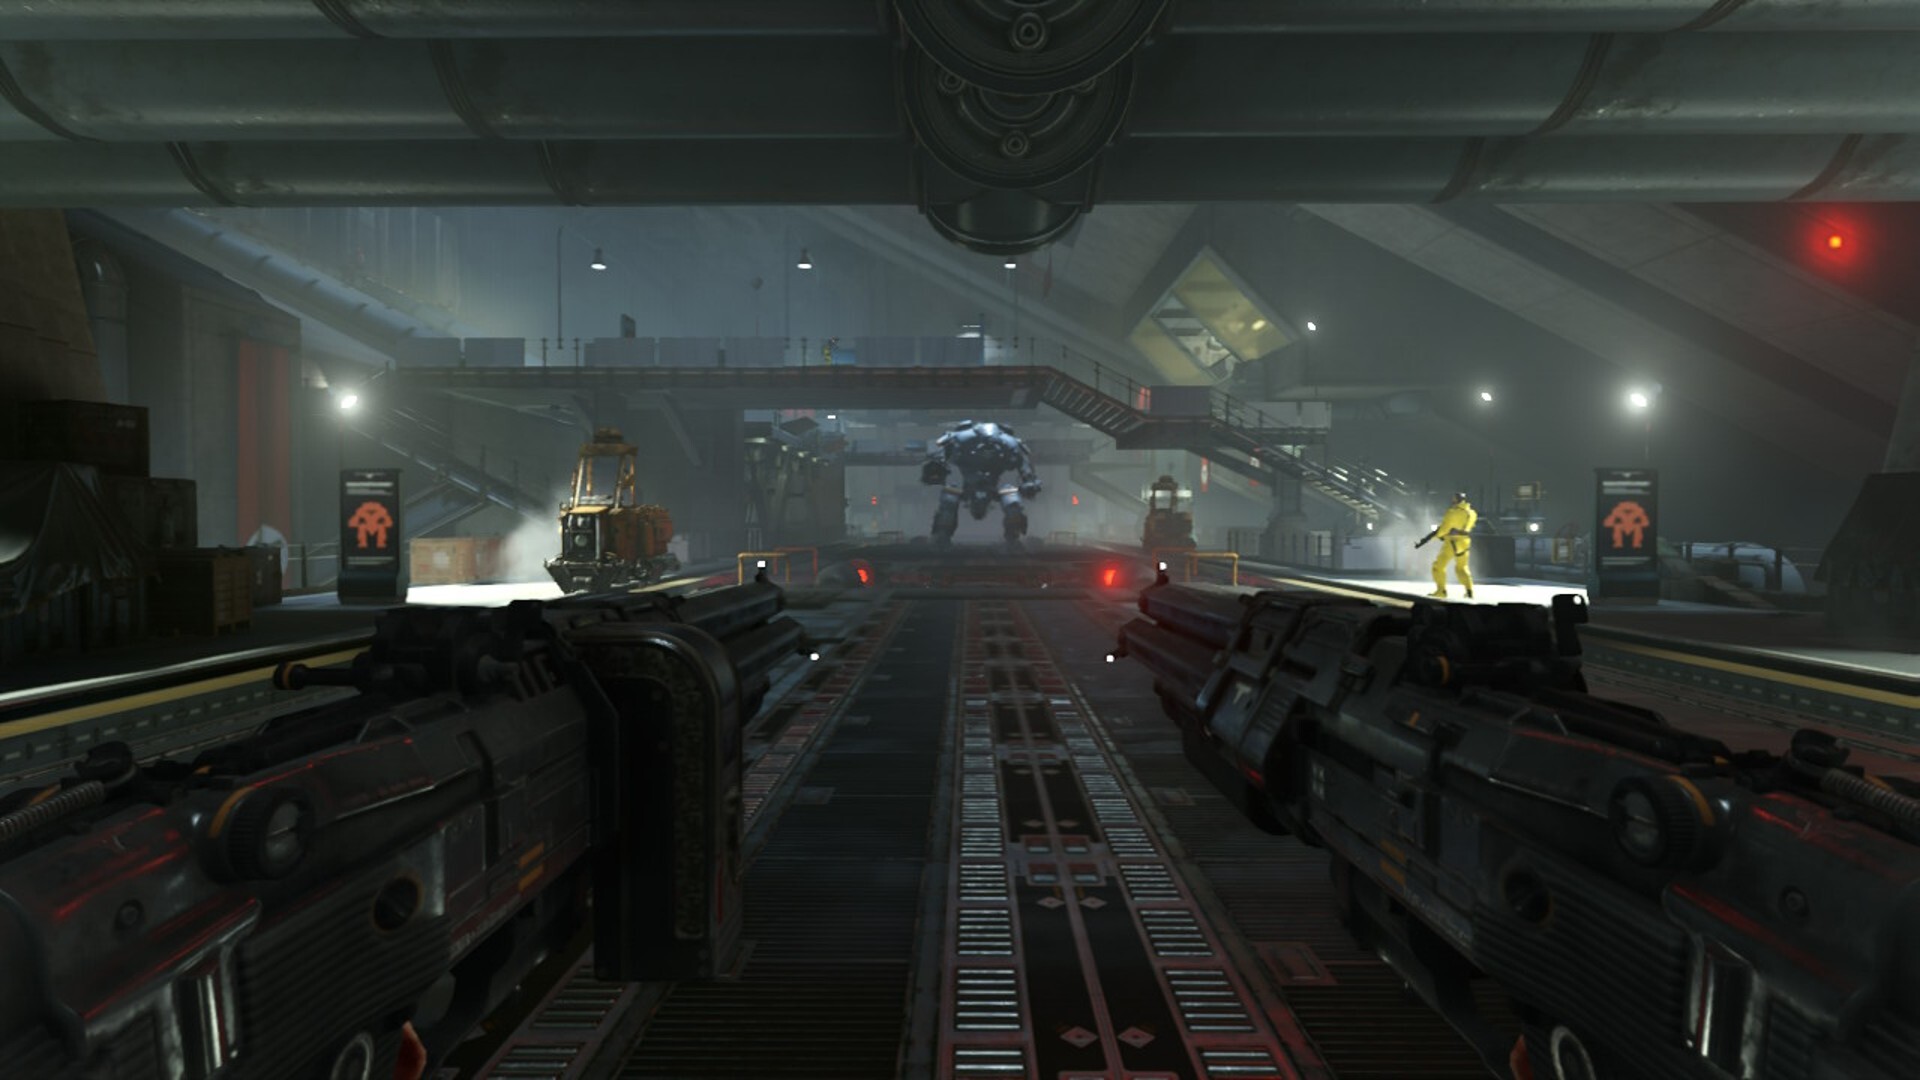 Best Switch FPS games: a metro station undeground with a mech at the end